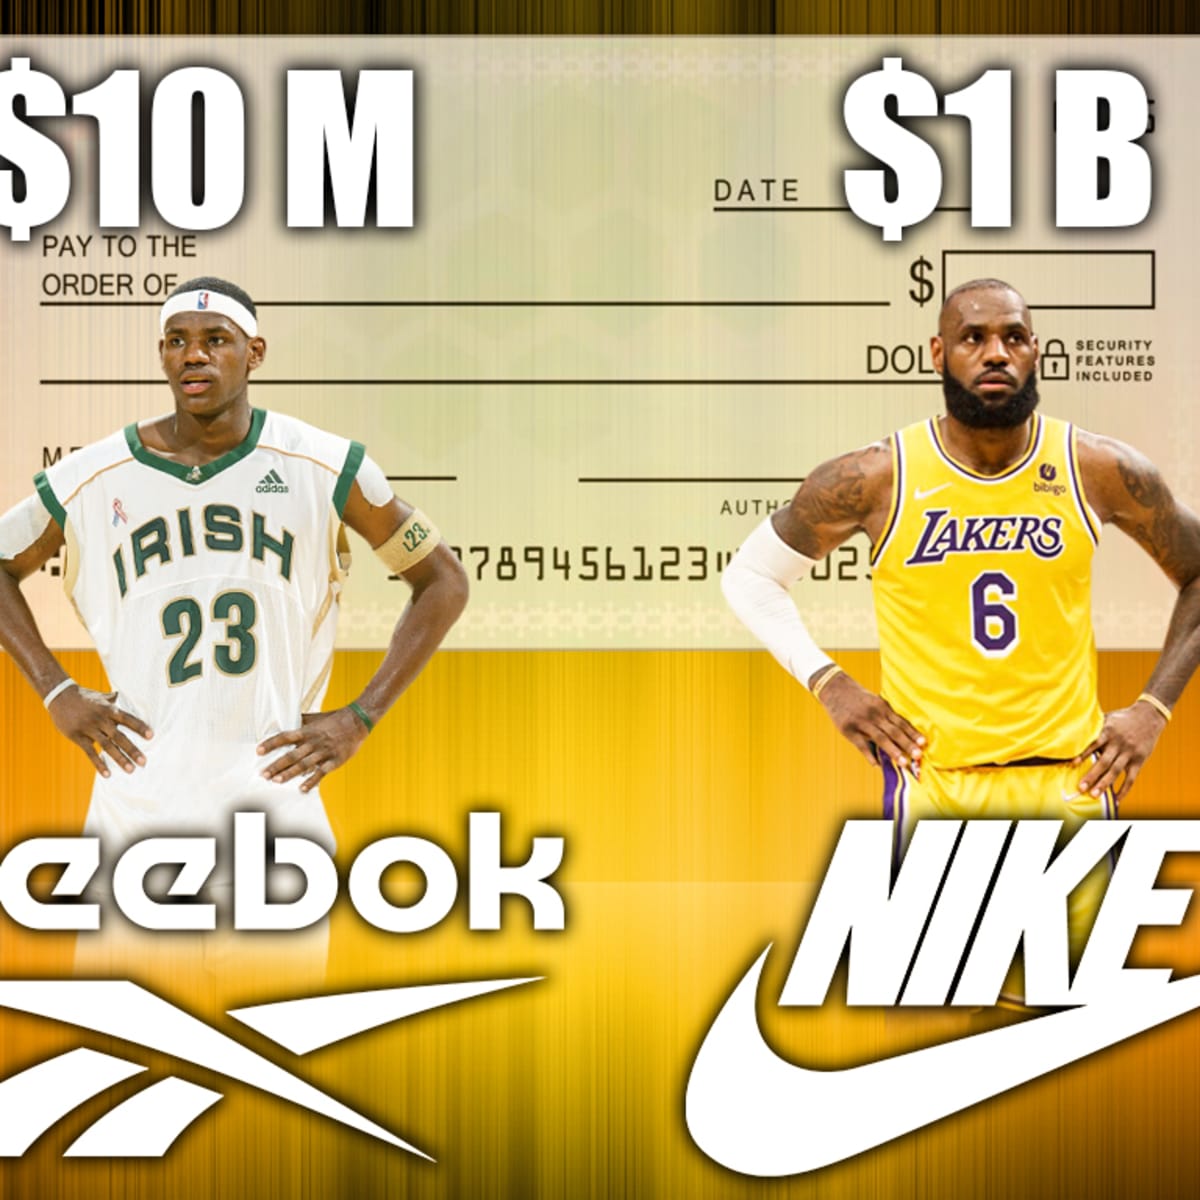 A Reebok Executive Offered A $10M Check To 18-Year Old LeBron James To Not  Negotiate With Nike Or Adidas, He Rejected The Offer, And Today, LeBron Has  A $1 Billion Lifetime Deal